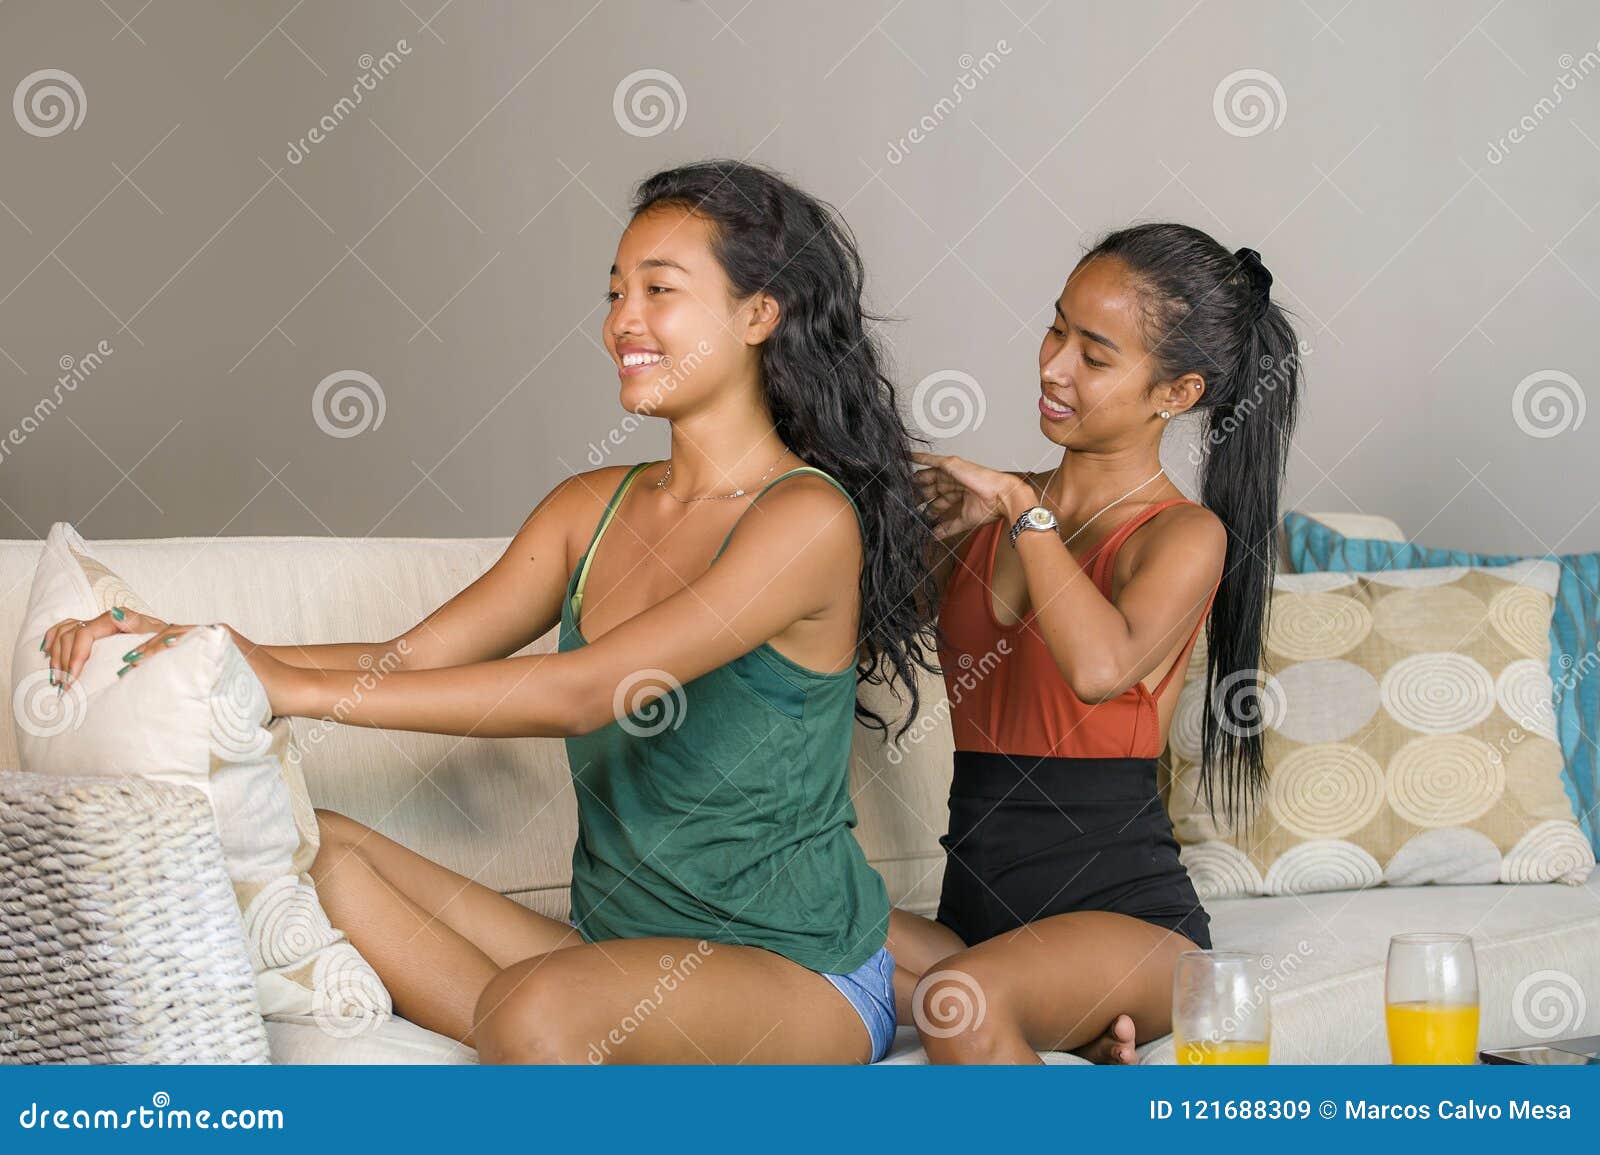 https://thumbs.dreamstime.com/z/young-beautiful-happy-asian-girlfriends-home-couch-one-girl-brushing-hair-other-woman-helping-preparing-dat-121688309.jpg